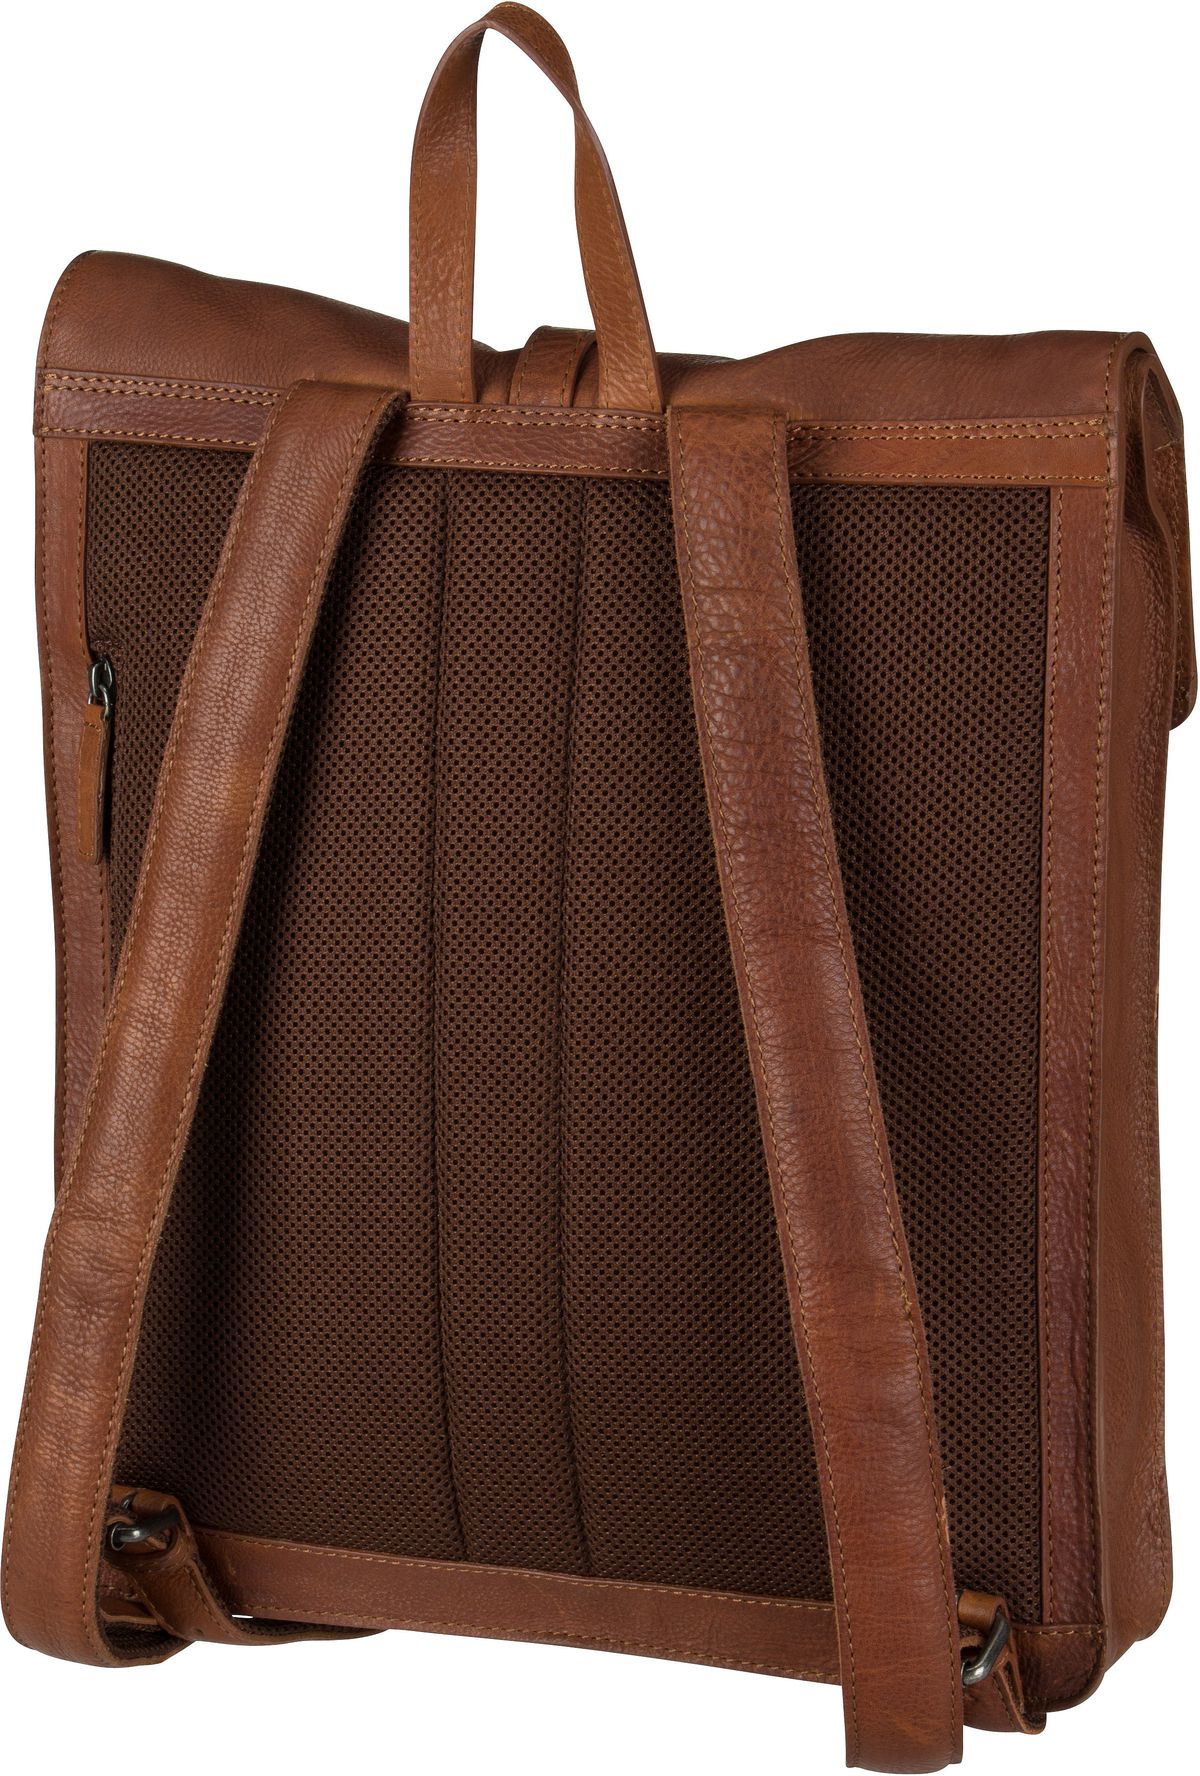 Burkely Antique Avery Backpack 6656 - Cognac